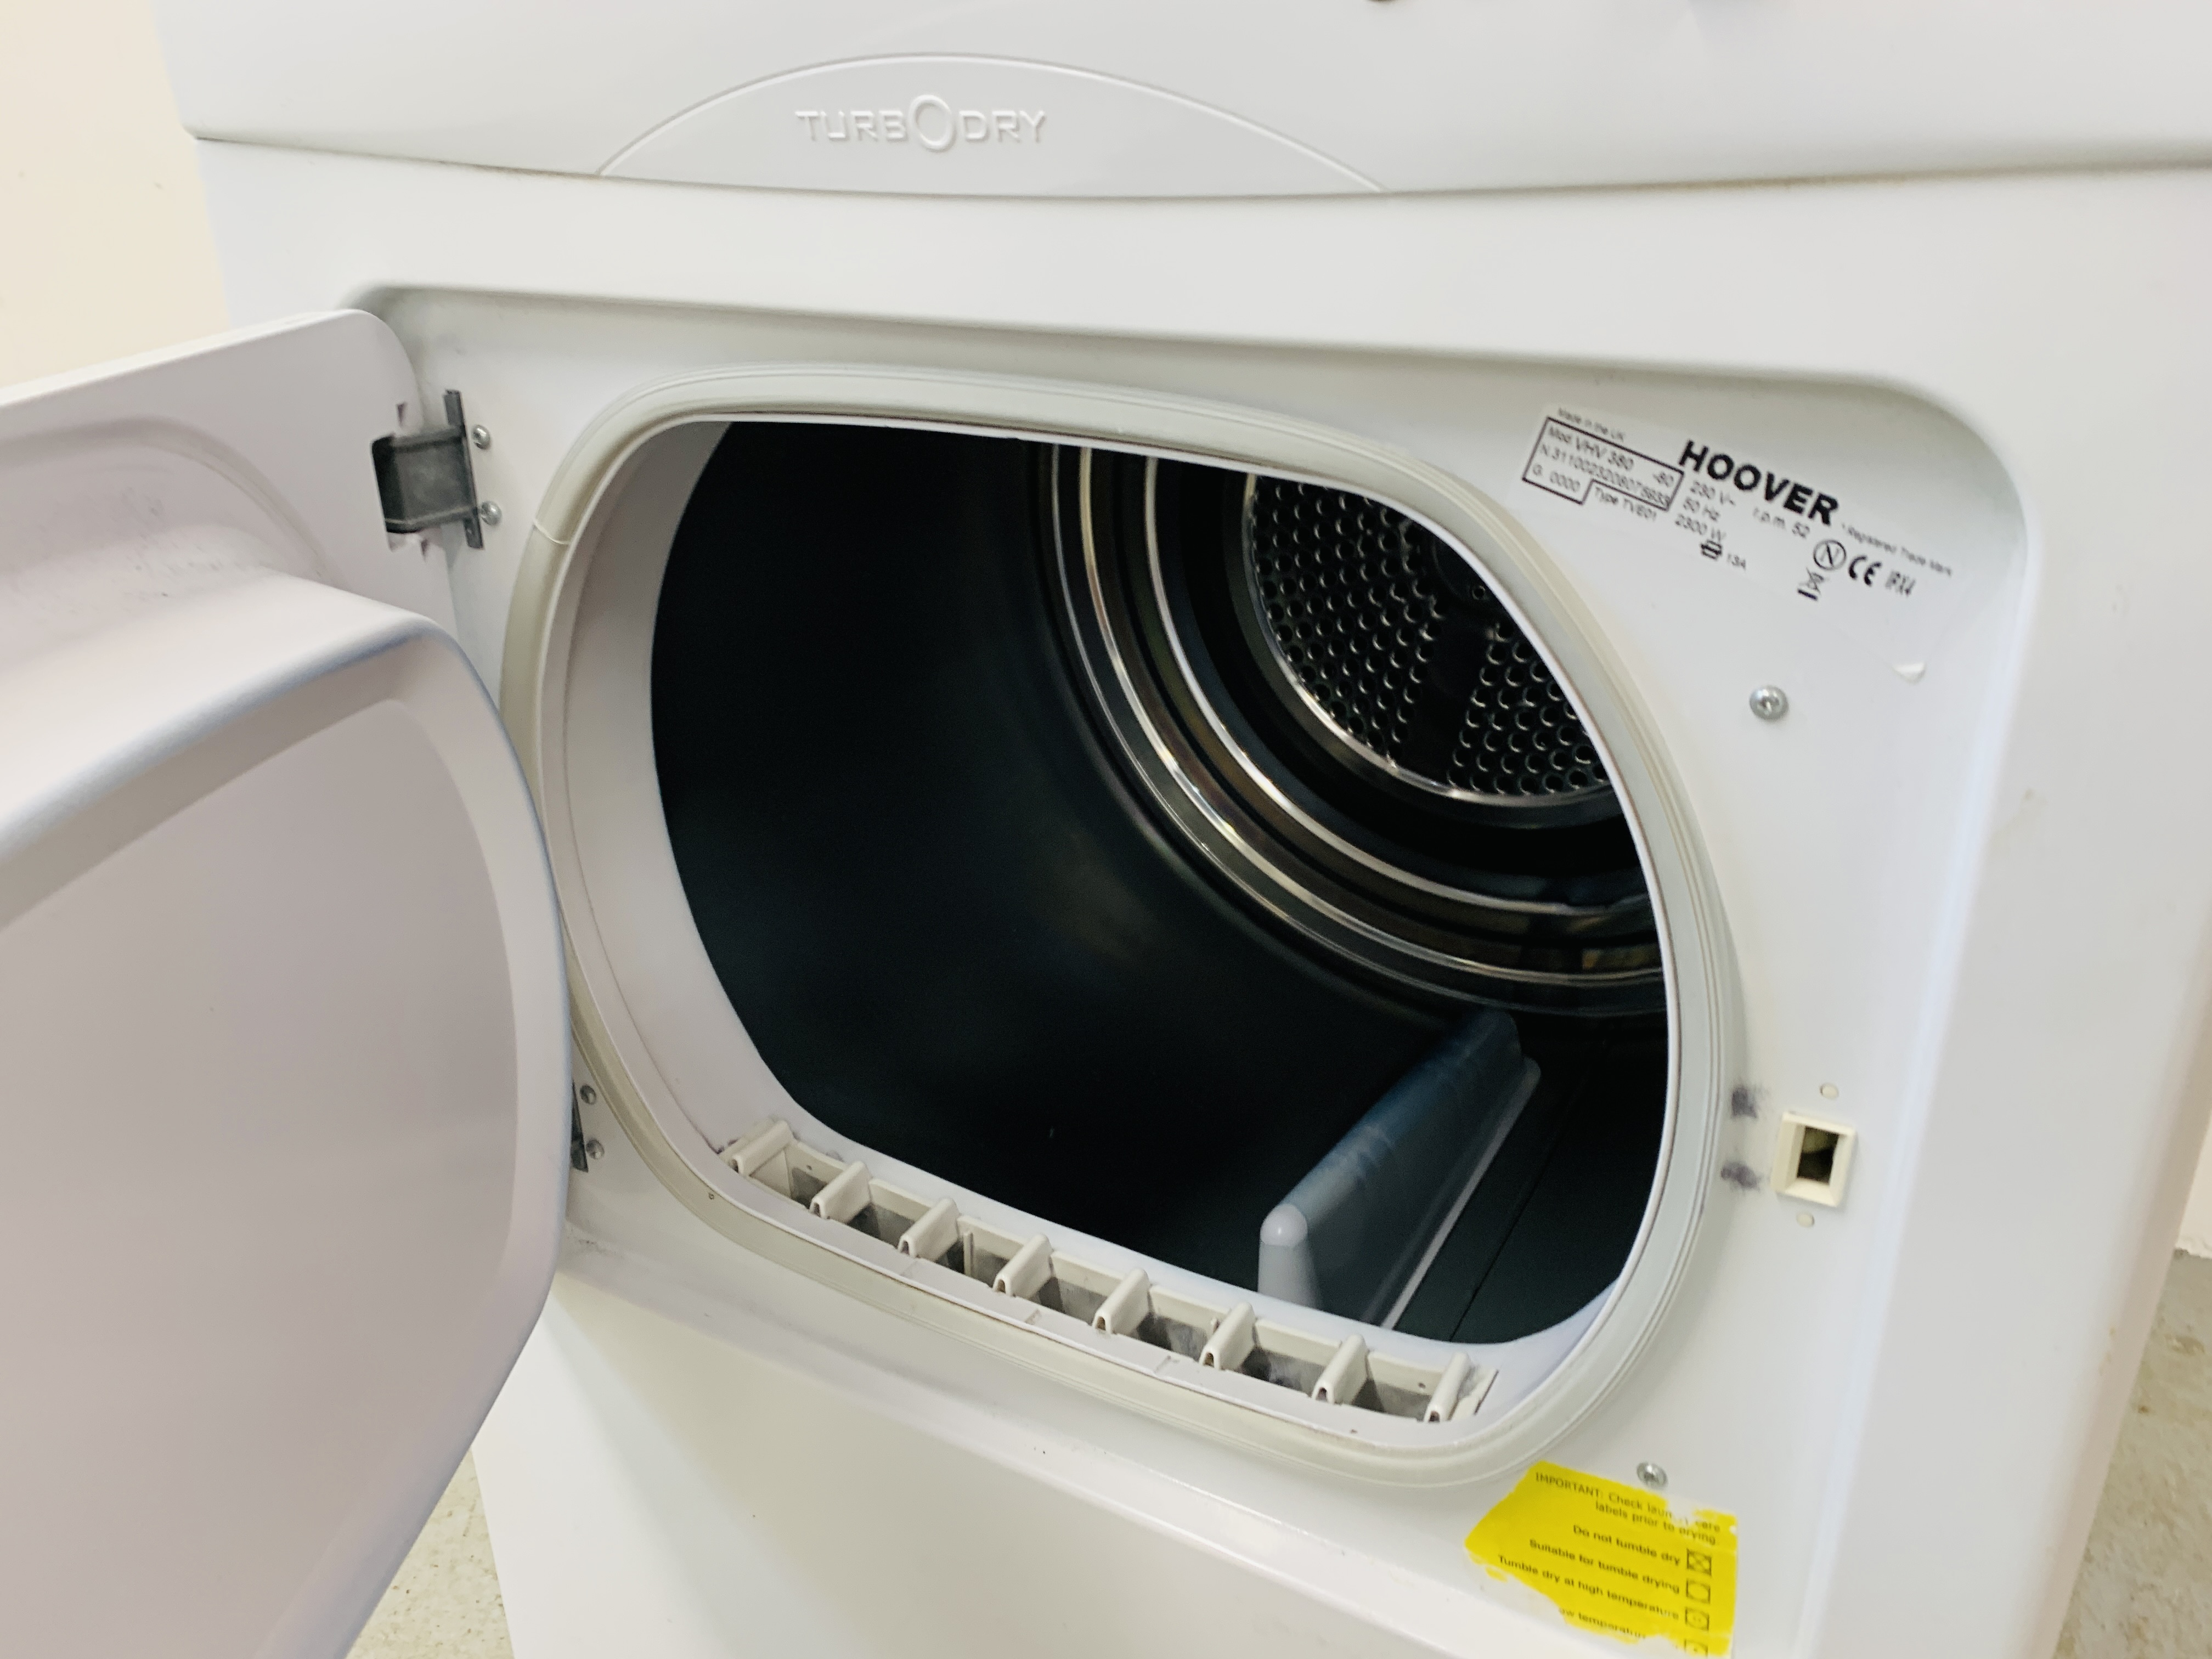 A HOOVER VISION HD 8 KG TUMBLE DRYER - SOLD AS SEEN. - Image 6 of 6